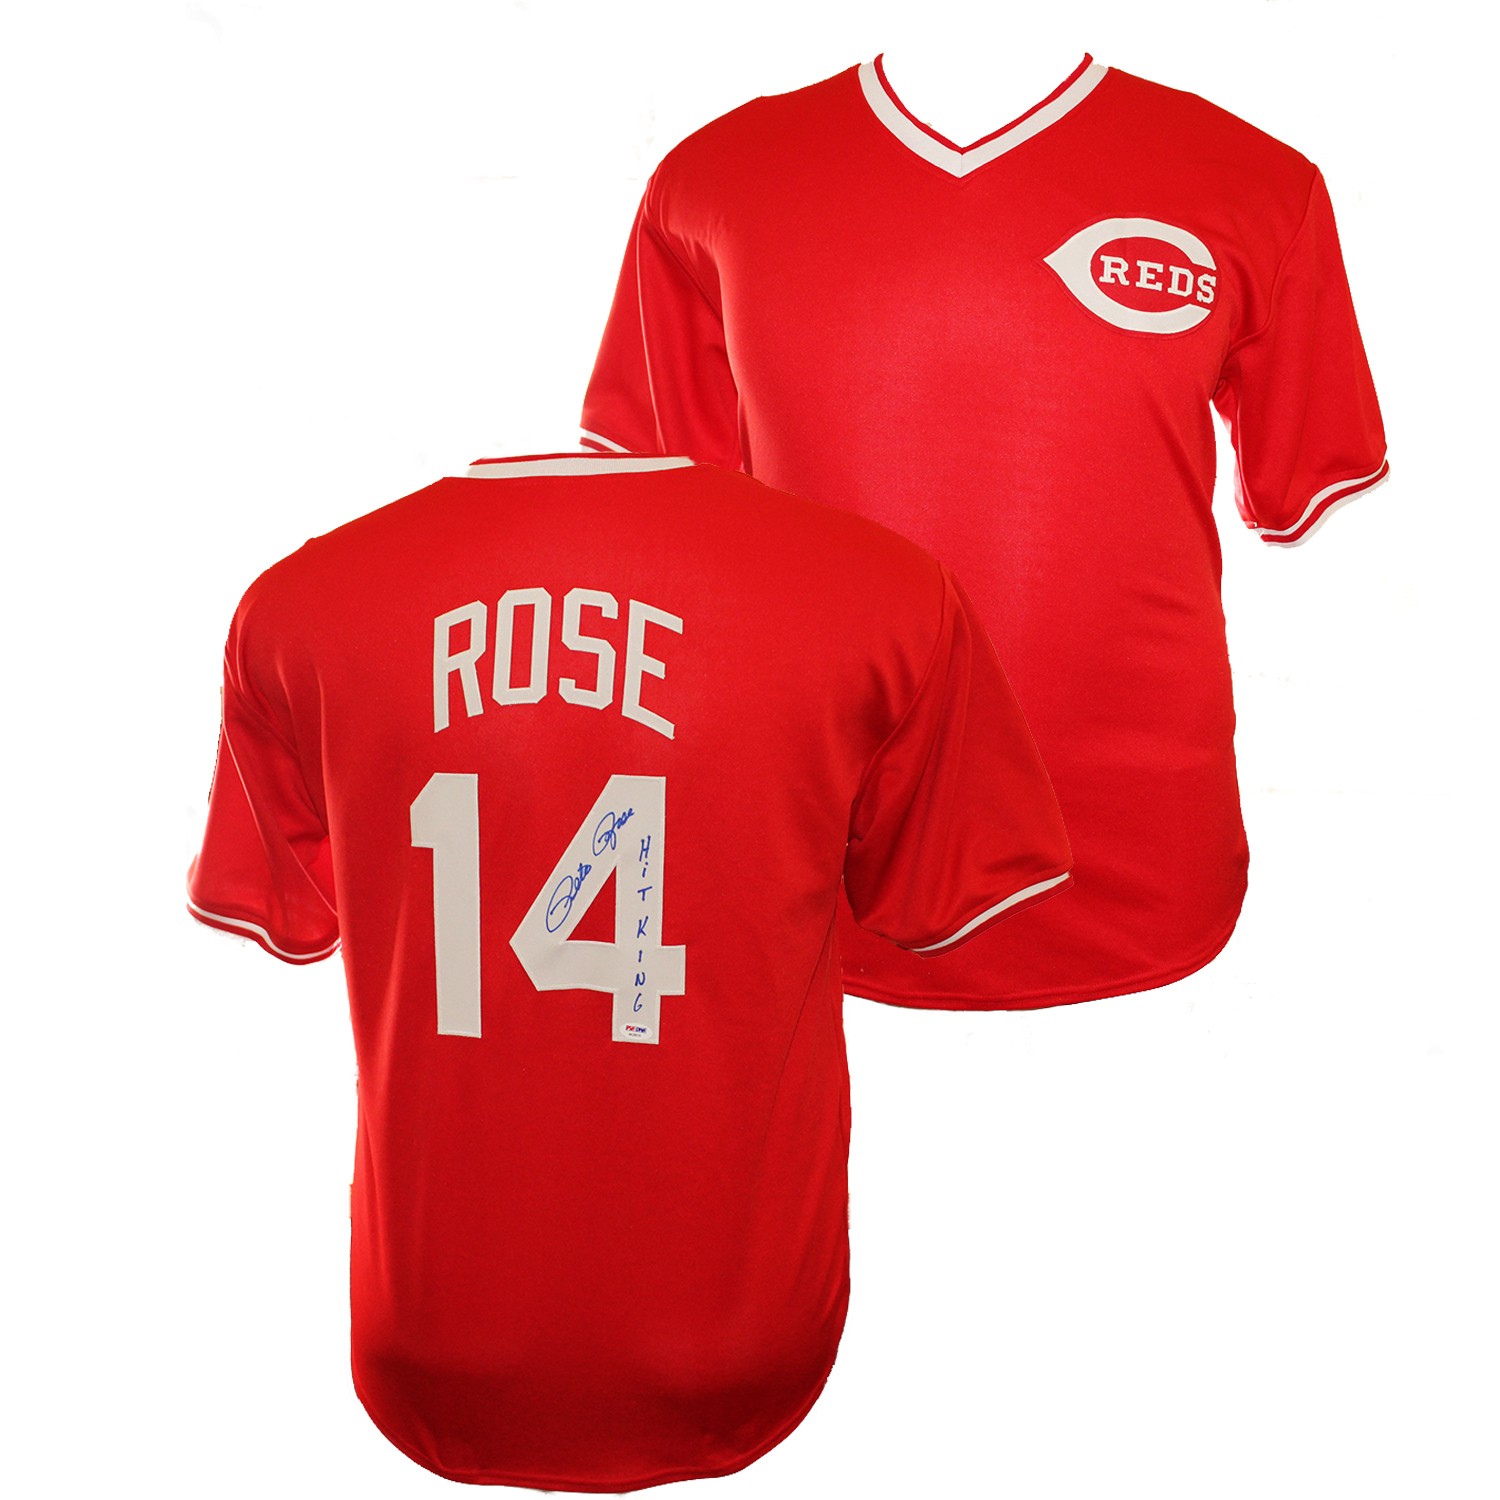 Pete Rose Autographed Signed Cincinnati Reds Custom Red Jersey Hit King Inscription Psa Dna Certified Authentic P3129455 